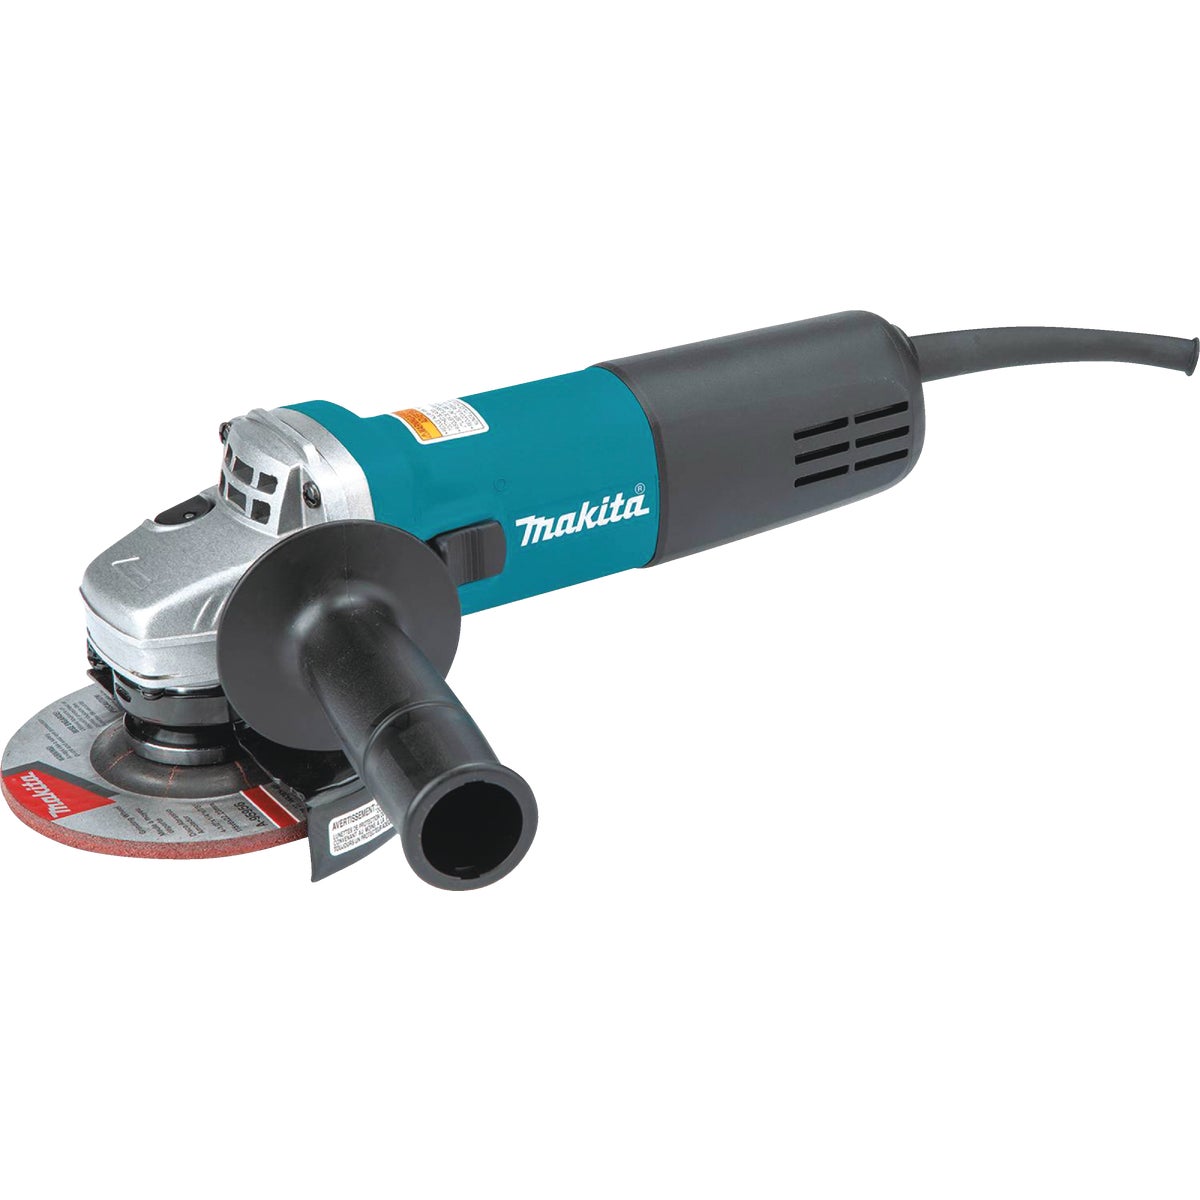 Makita 4-1/2 In. 7.5-Amp Angle Grinder with Lock-On